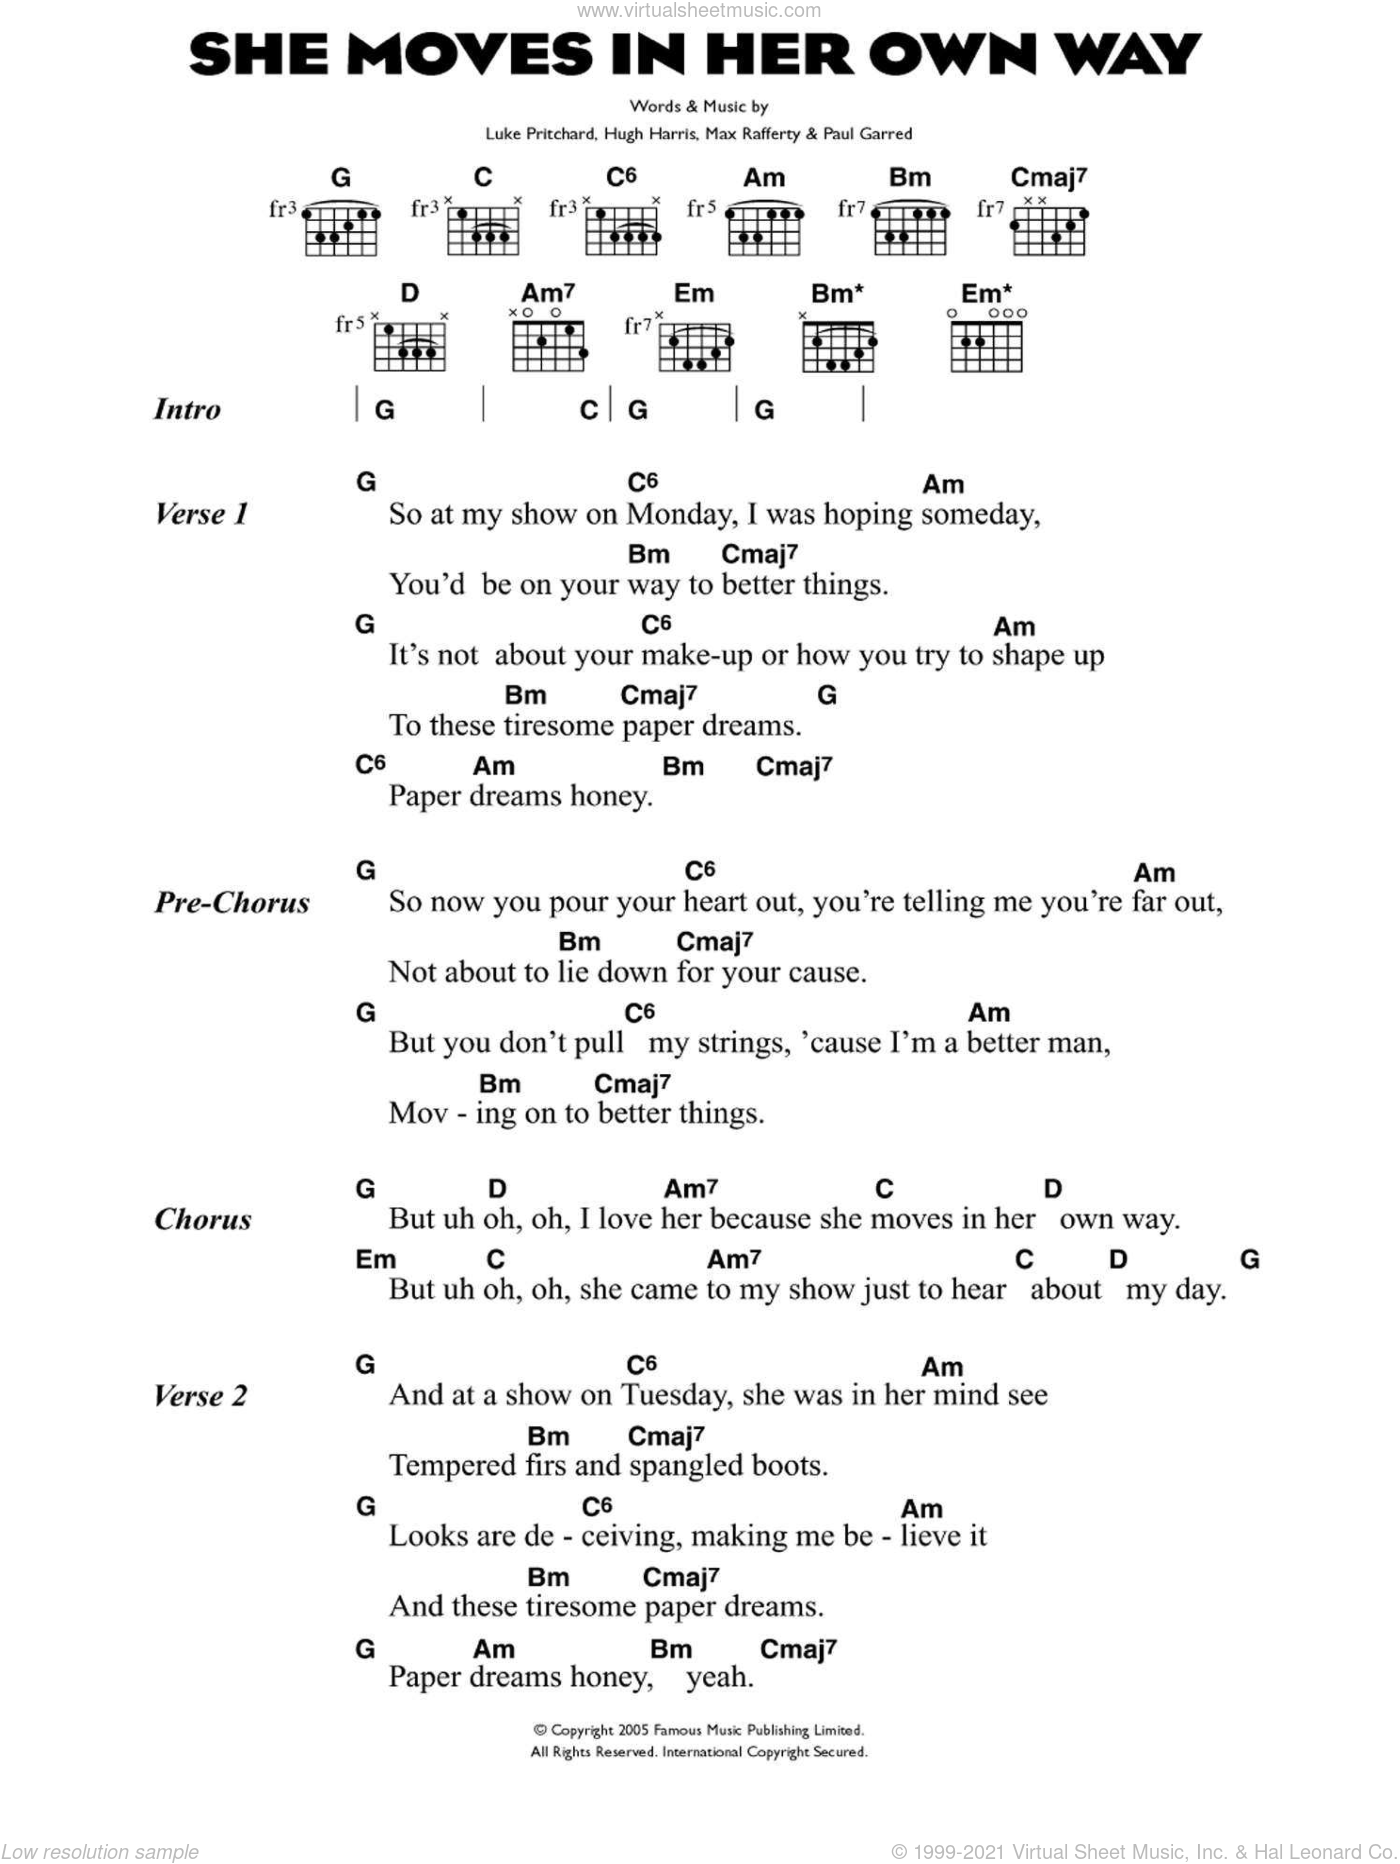 She's About A Mover - Guitar Chords/Lyrics